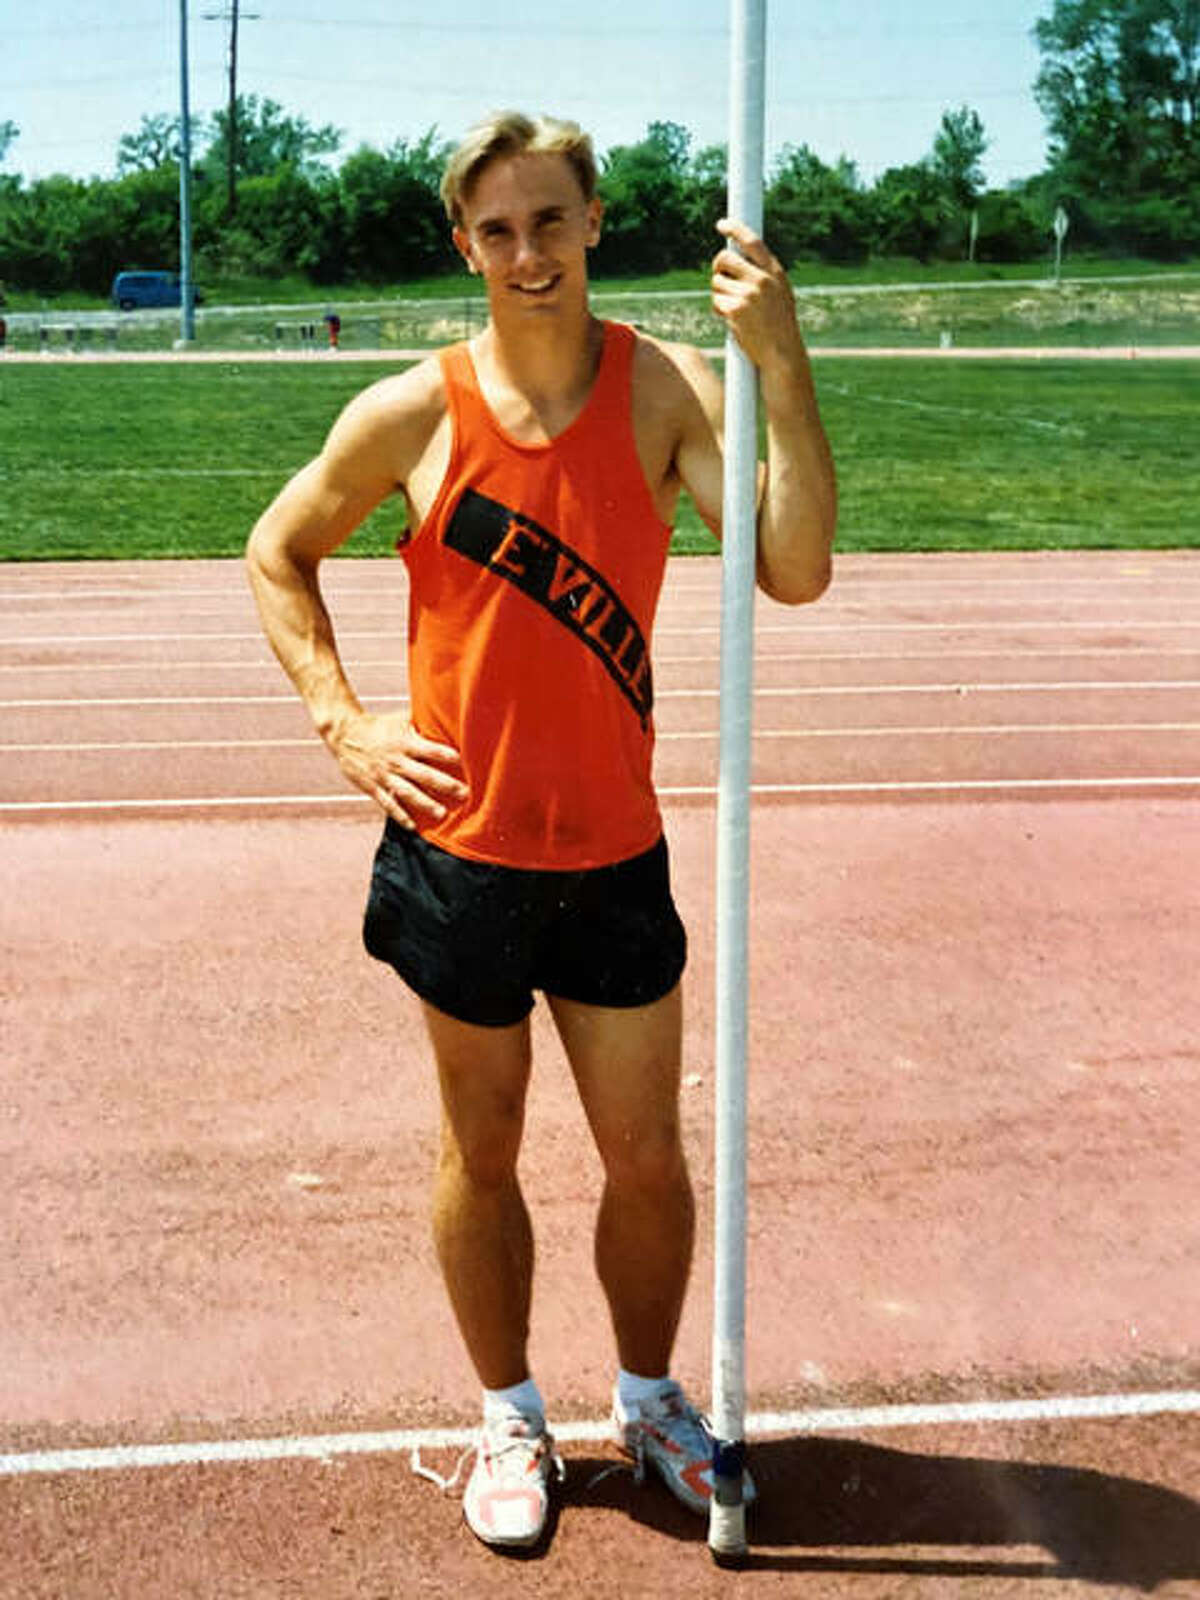 Daren McDonough was a two-time Class AA state champion in the pole vault at Edwardsville. His vault of 17-0.5 during his senior year in 1992 set a state record that lasted for 18 years.